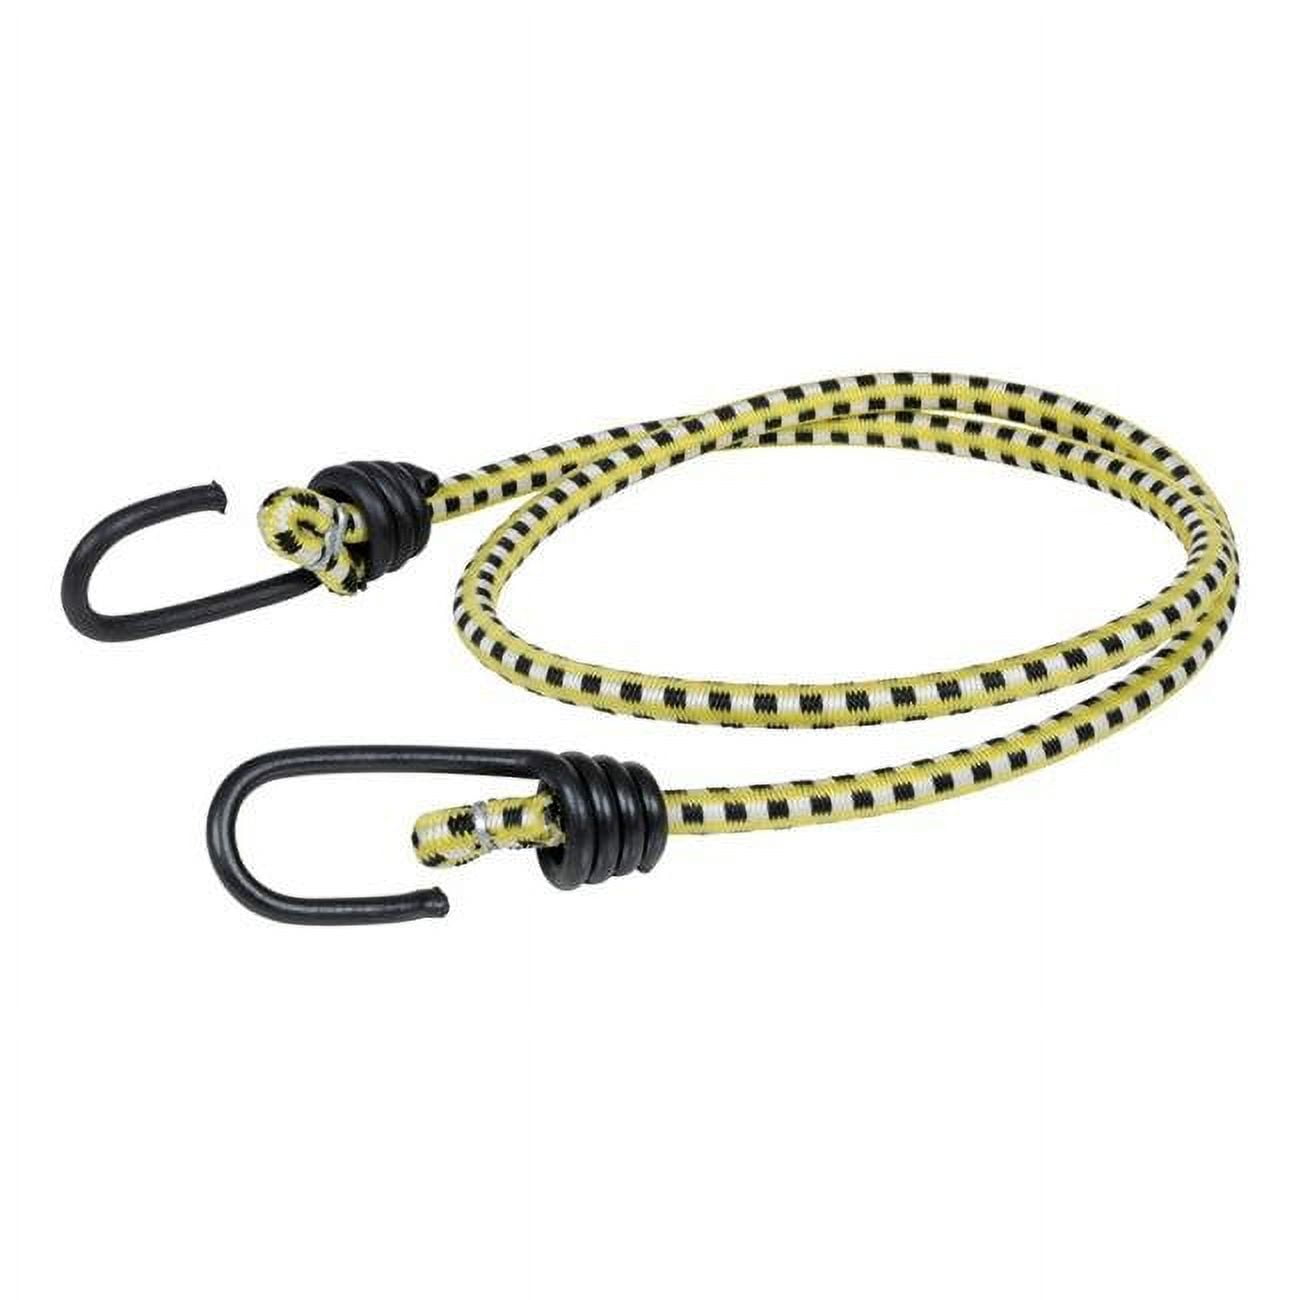 8865750 Yellow Bungee Cord, 36 X 0.315 In. - Case Of 10